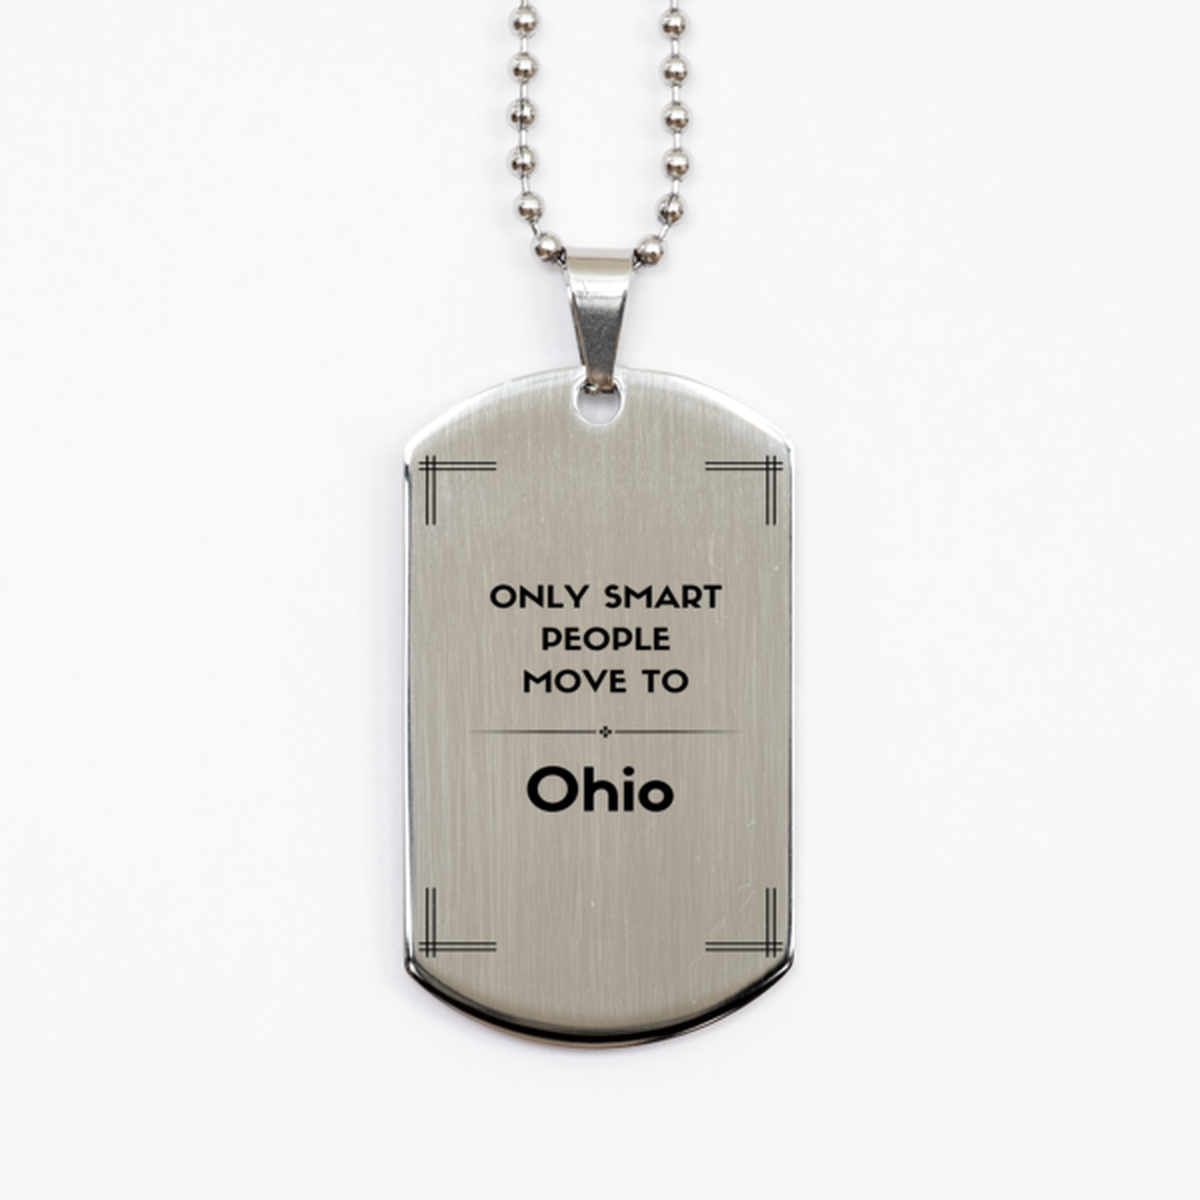 Only smart people move to Ohio Silver Dog Tag, Gag Gifts For Ohio, Move to Ohio Gifts for Friends Coworker Funny Saying Quote